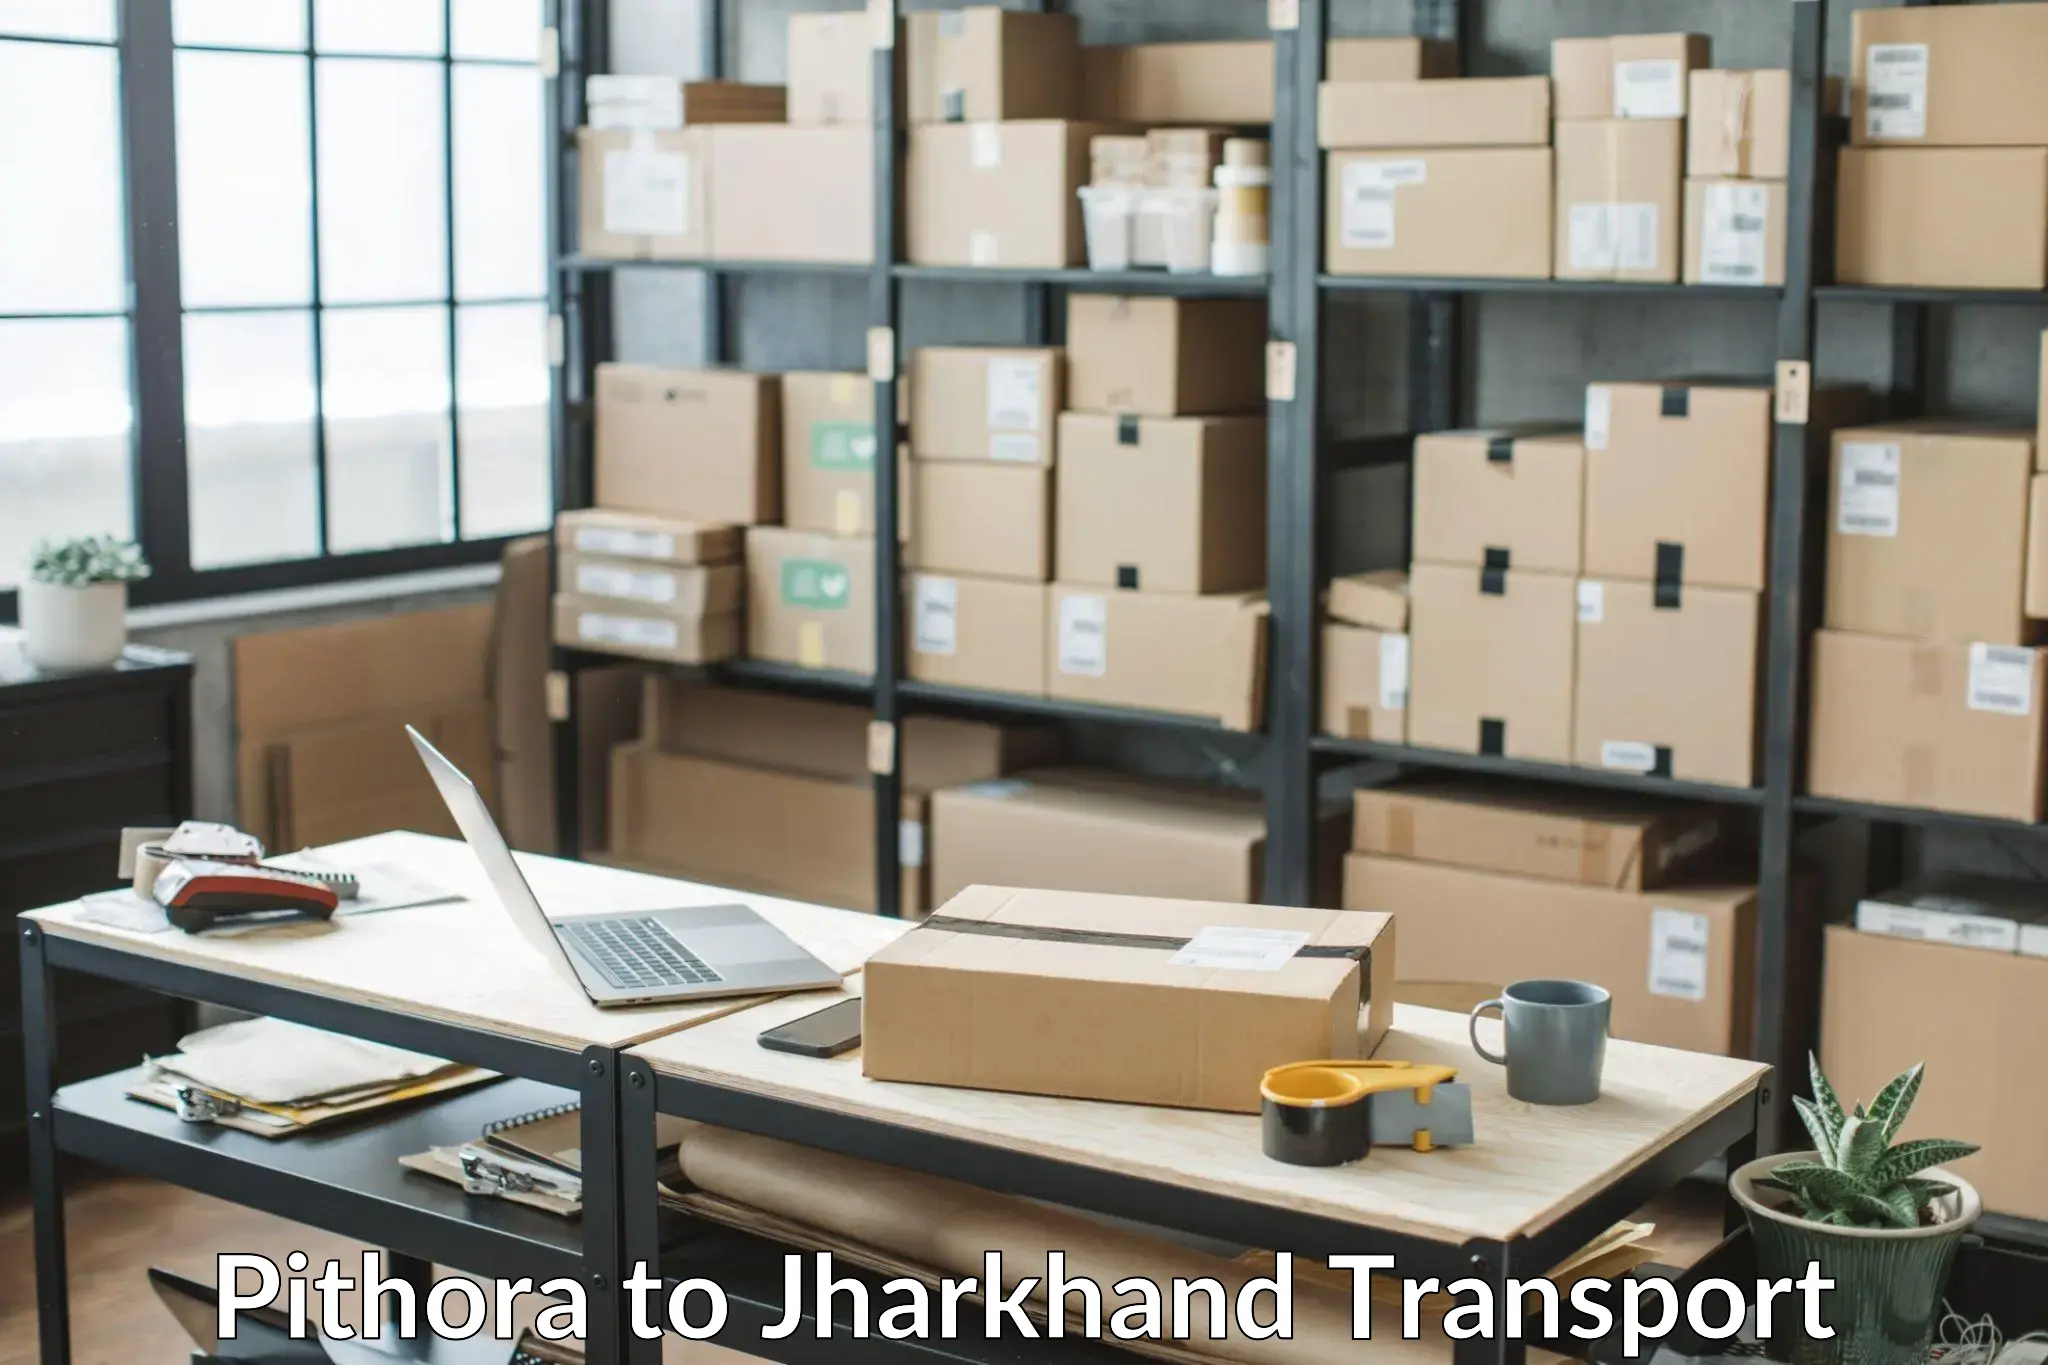 Truck transport companies in India Pithora to Dhanbad